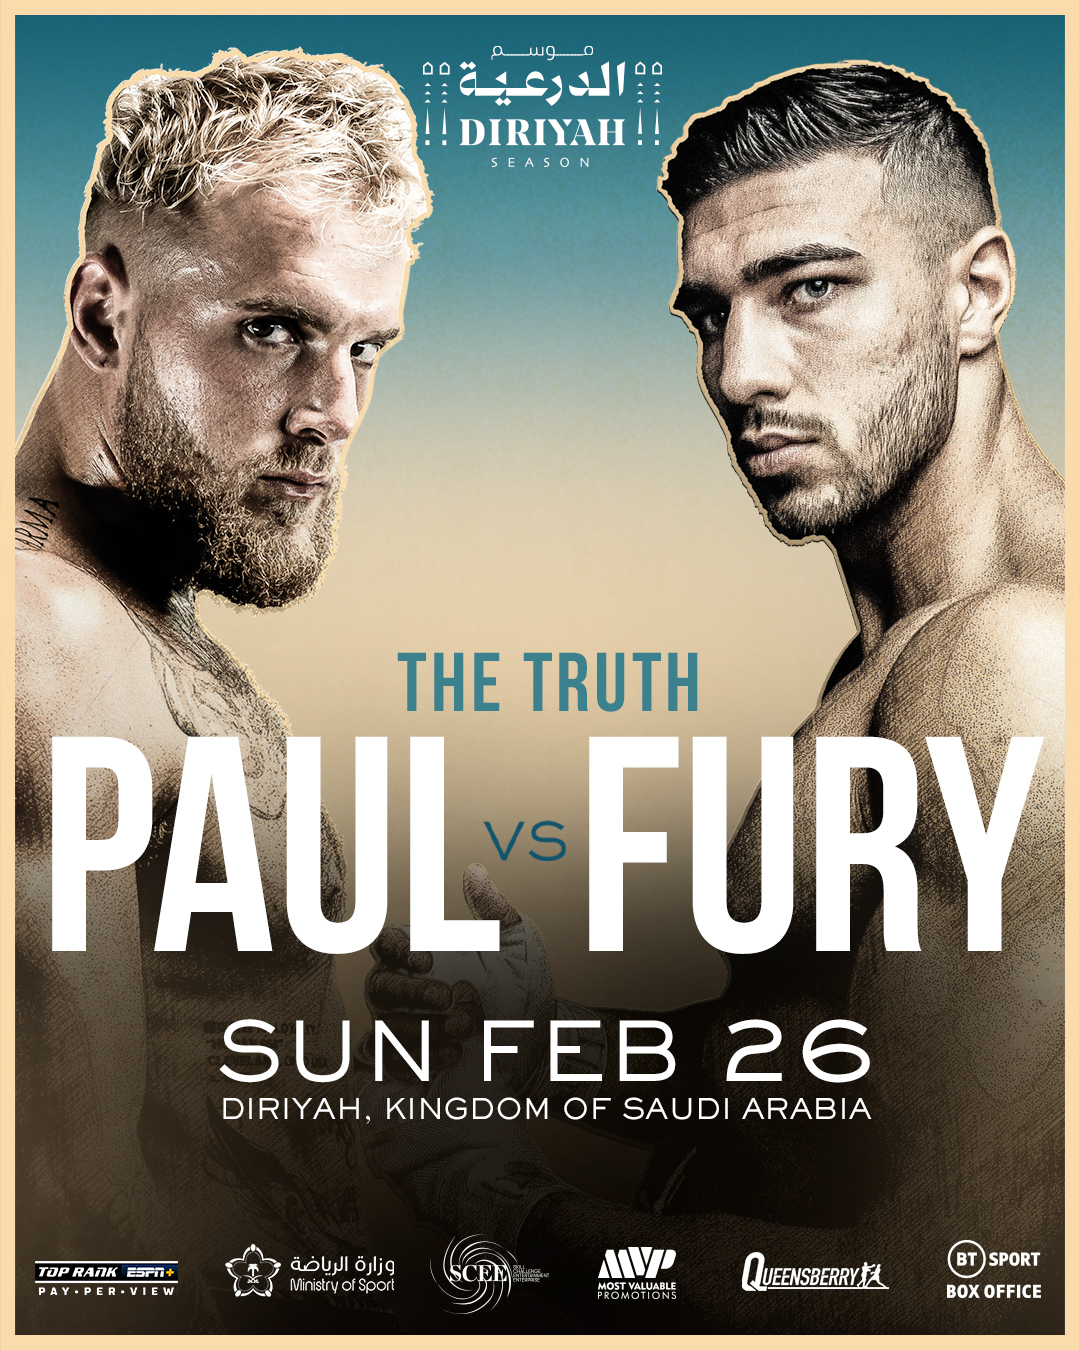 Jake Paul will face Tommy Fury on February 26 from Saudi Arabia